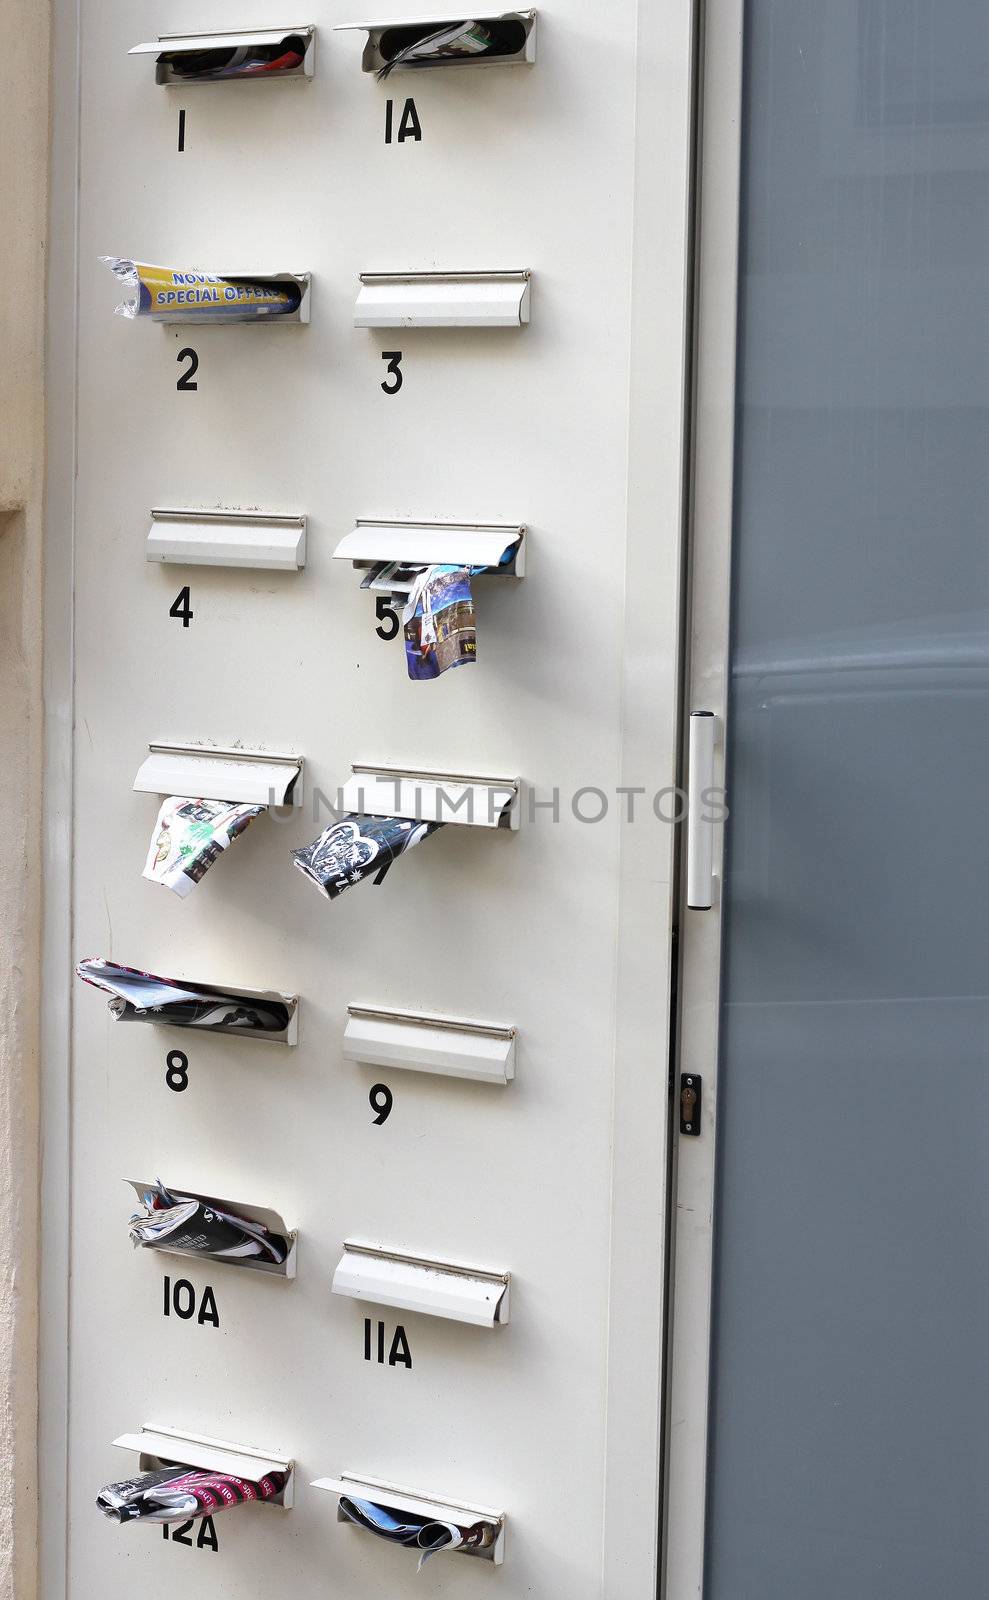 Direct mail in letterbox by annems